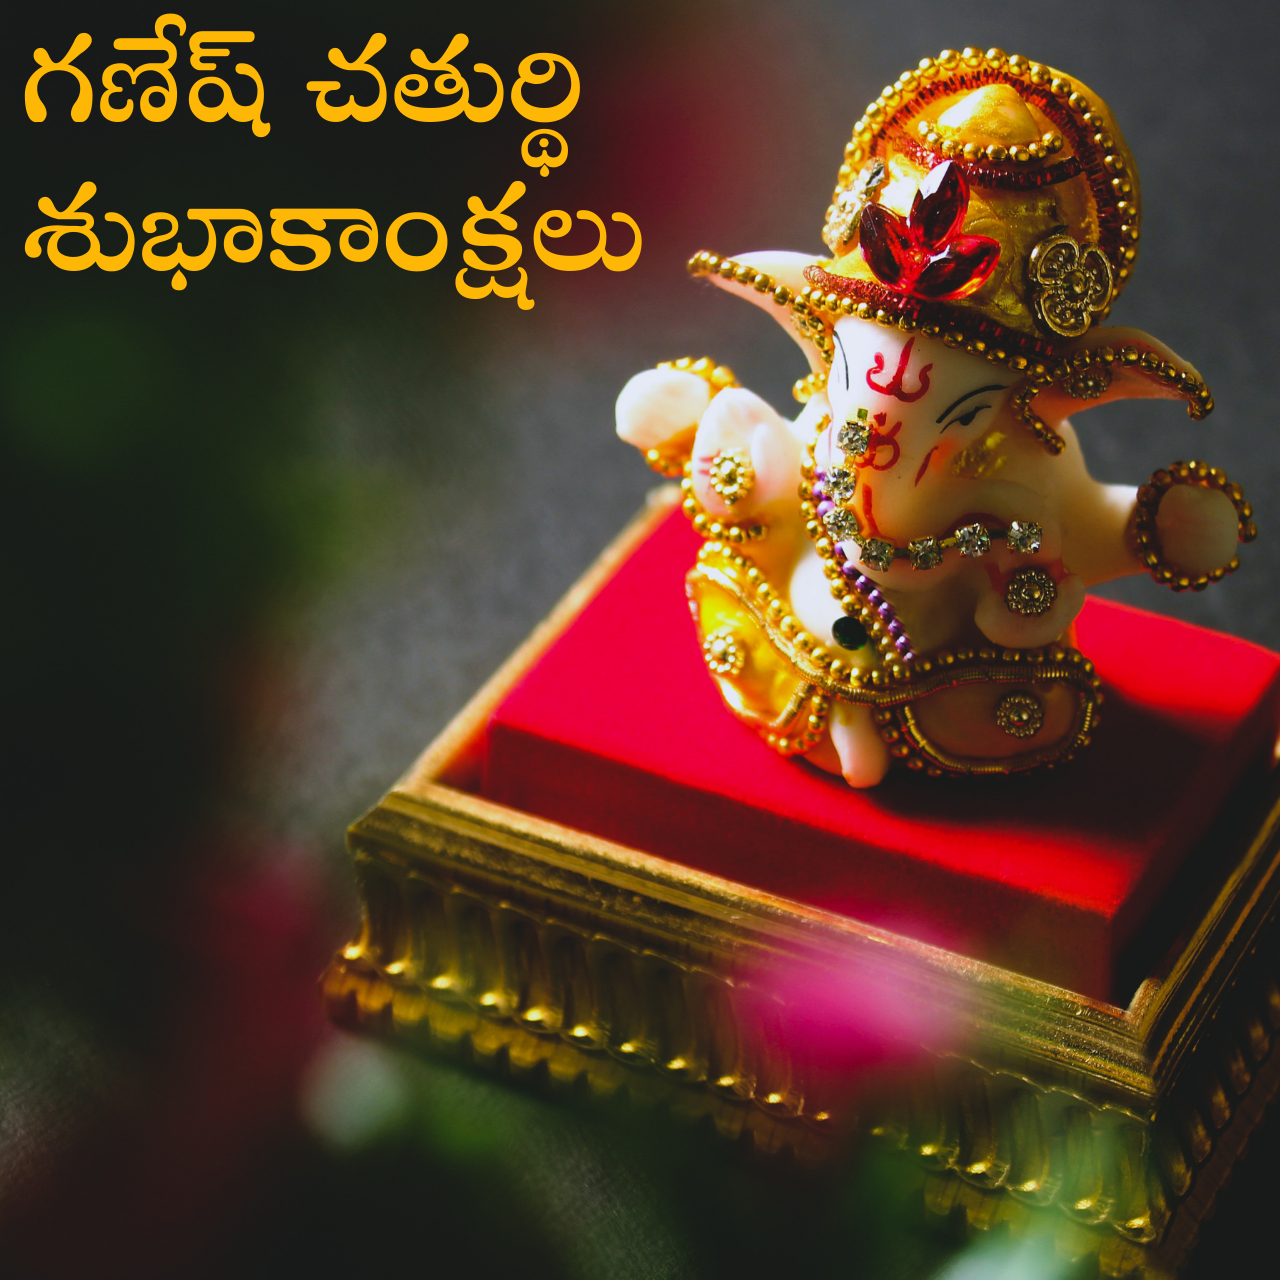 Ganesh Chaturthi 2021 Telugu Wishes Quotes Hd Images Messages Greetings And Status To Share 4724